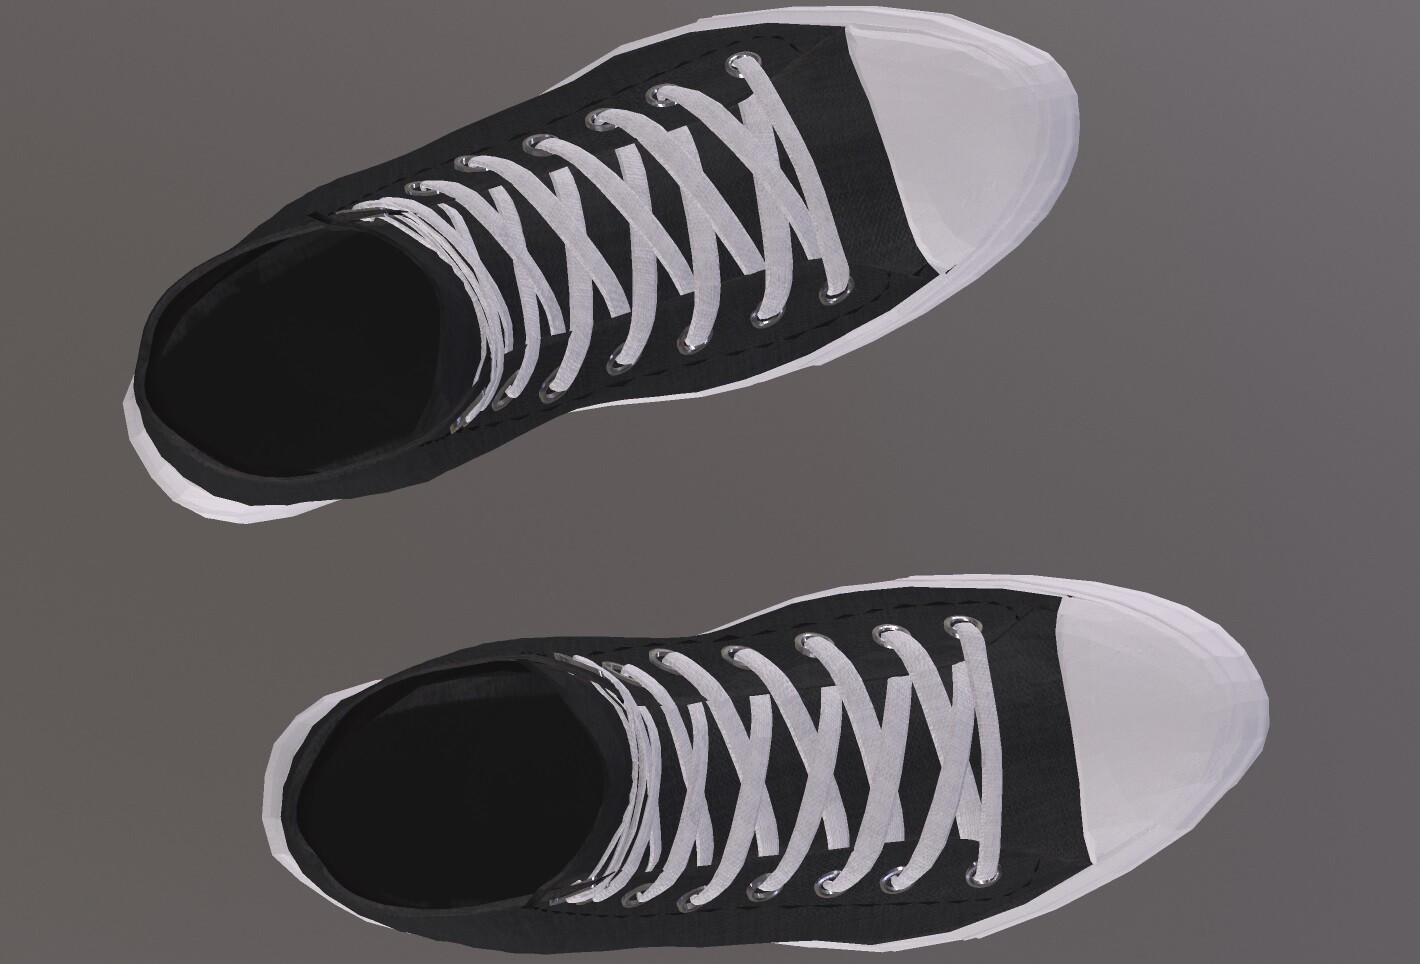 ArtStation RICK OWENS RAMONES SHOES Low-poly PBR Game Assets | lupon.gov.ph